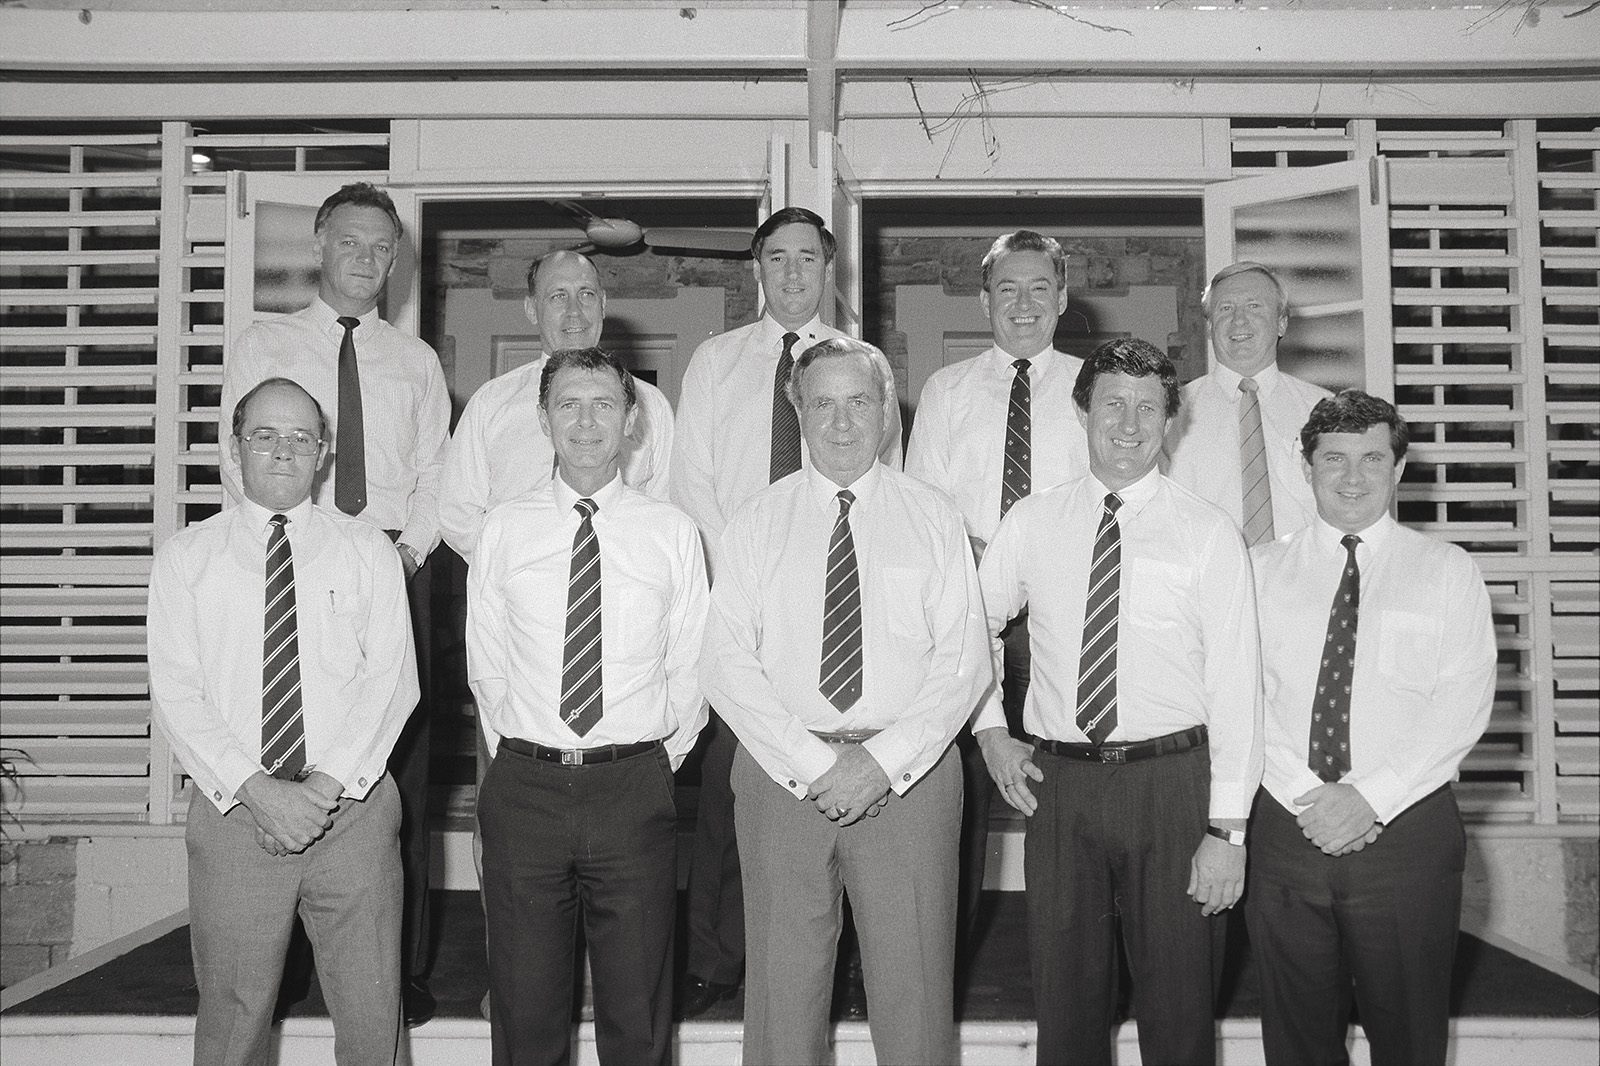 New Ministry, 13 December 1990<br />Back row: Hon. Steve Hatton MLA , Hon Max Ortmann MLA , Hon. Mike Reed MLA, Hon. Daryl Manzie MLA, Hon. Fred Finch MLA <br />Front row: Hon. Roger Vale MLA, Hon. Marshall Perron MLA, Administrator Hon. Justice James Muirhead AC, Hon. Barry Coulter MLA, Hon. Shane Stone, MLA<br />Image courtesy of Library & Archives NT,  Department of the Chief Minister, NTRS 3823 P1, Box 11, BW2950, Image 18